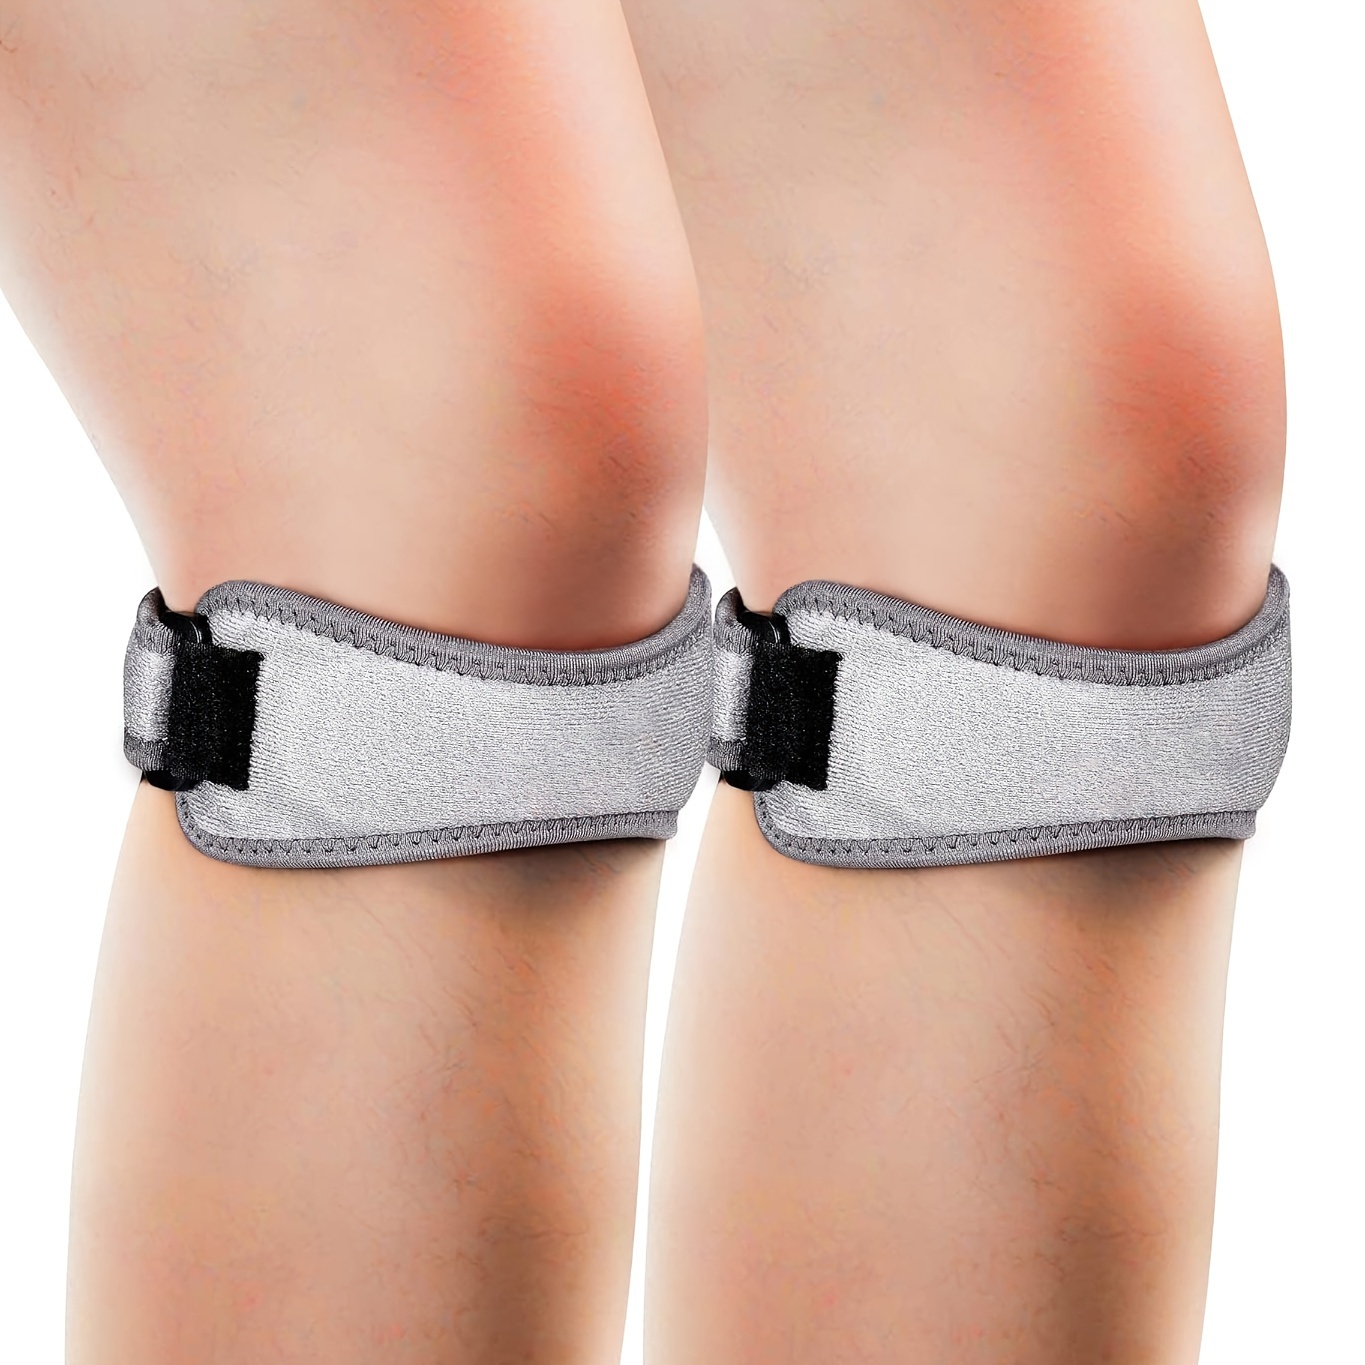 Patella Tendon Knee Strap 2 Pack, Knee Pain Relief Support Brace Hiking,  Soccer, Basketball, Running, Jumpers Knee, Tennis, Tendonitis, Volleyball 